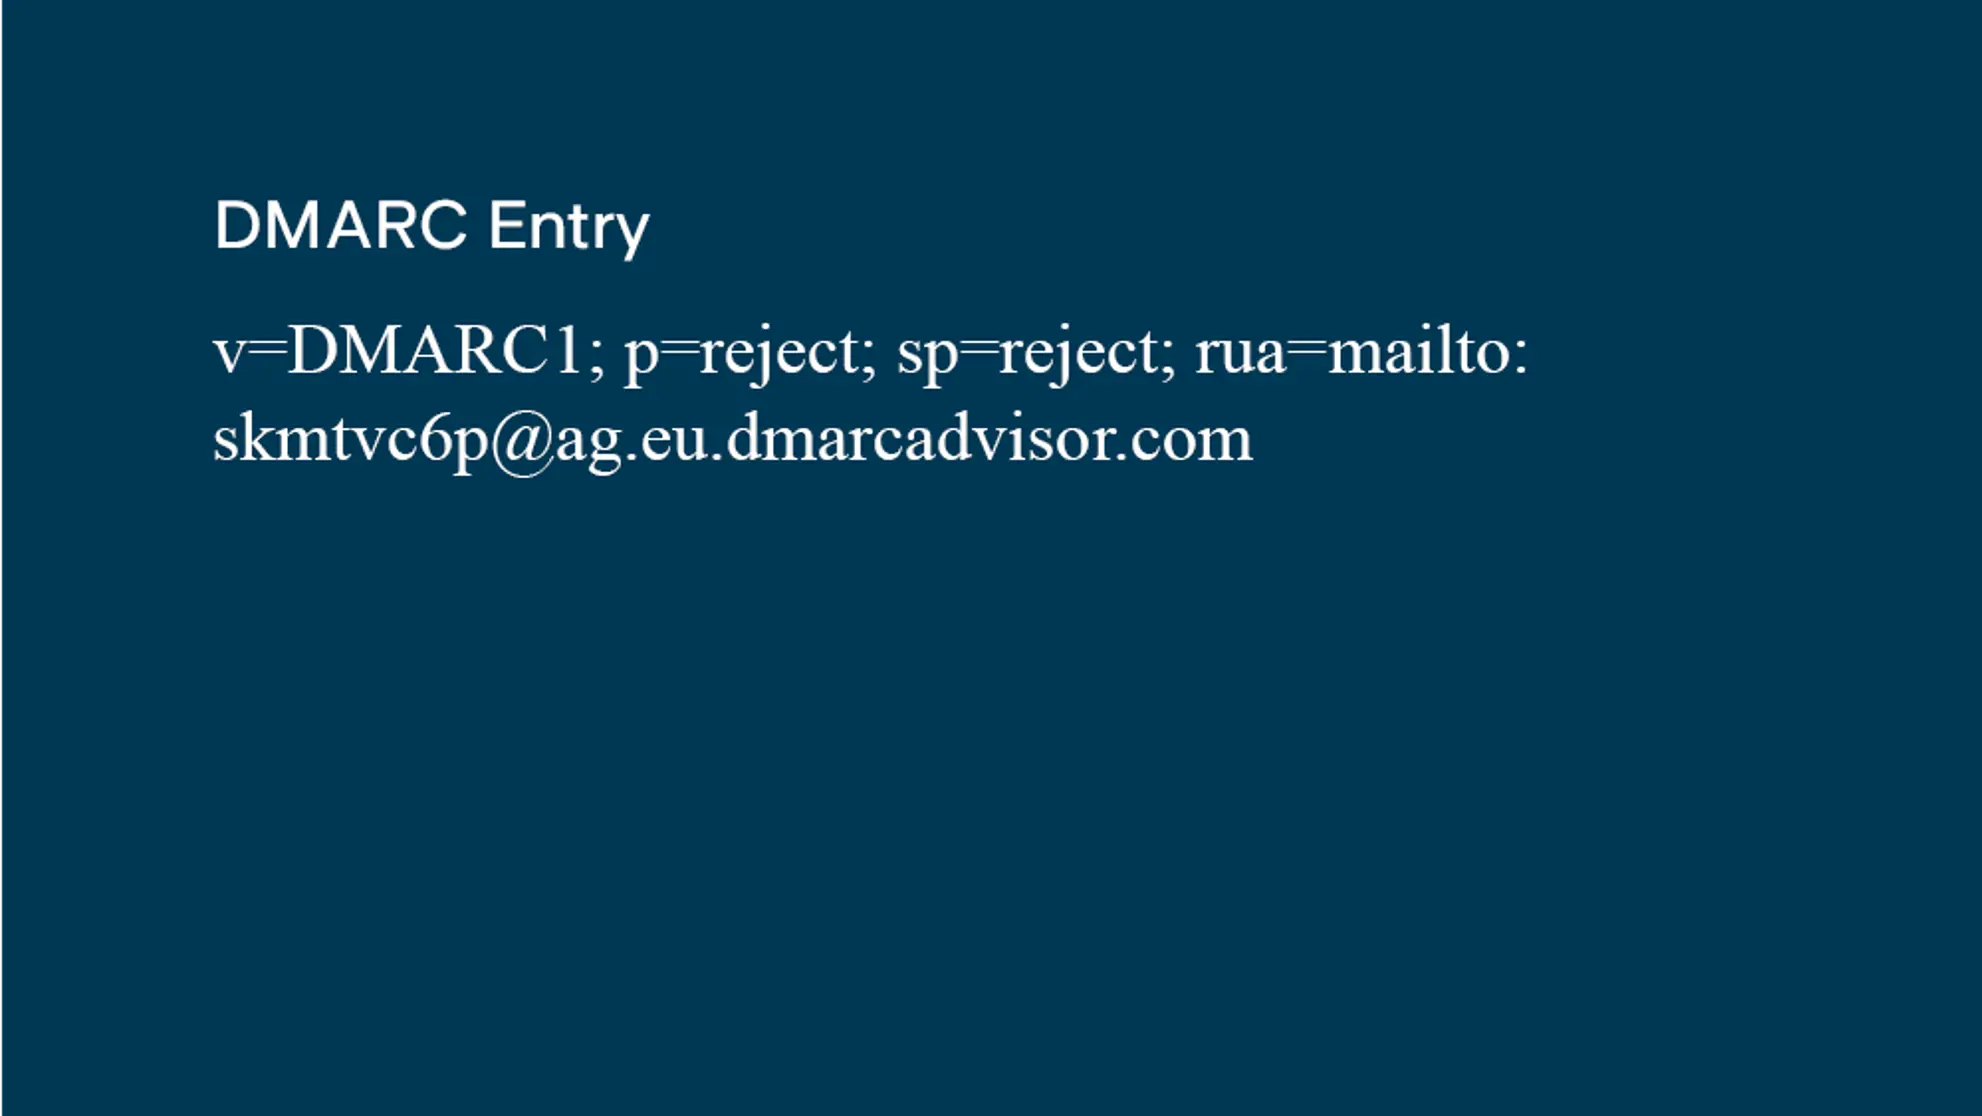 E Mail Security DMARC Entry Code